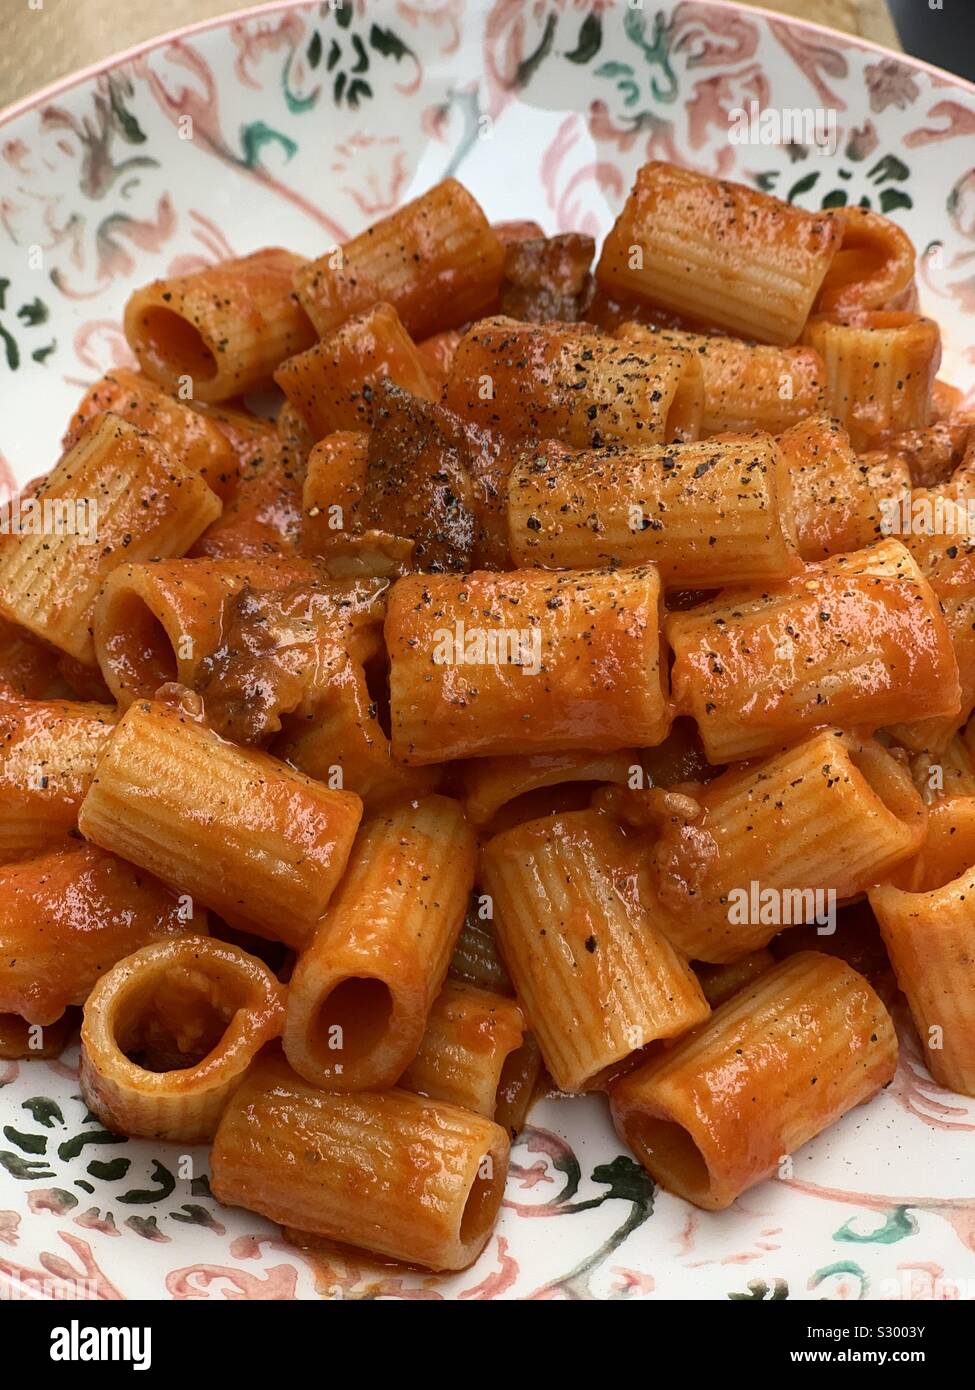 Mezze maniche all’amatriciana, typical dish from the town of Amatrice, Lazio region, Italy Stock Photo